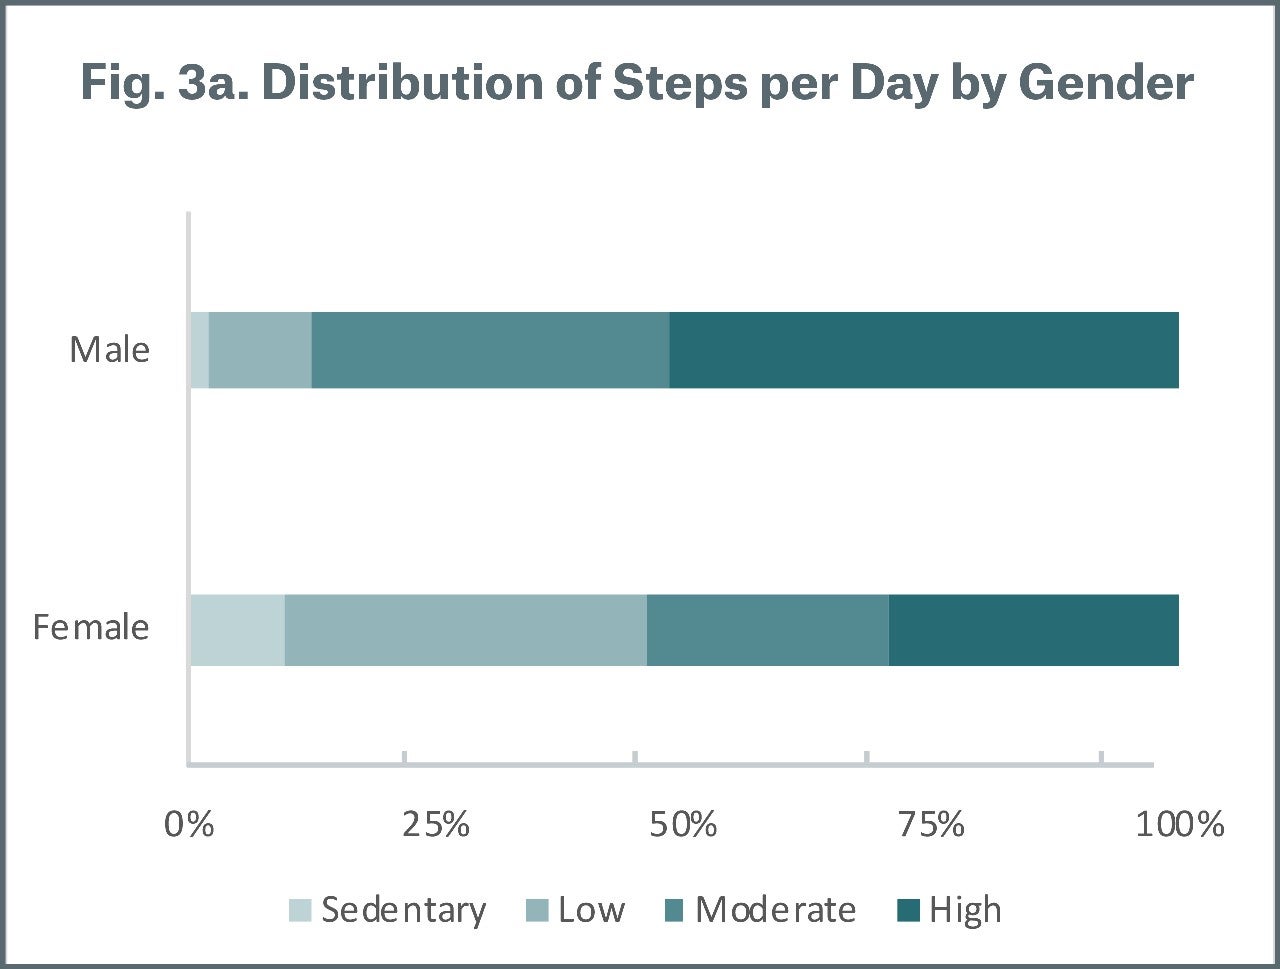 Figure 3a Distribution of Steps per Day by Gender